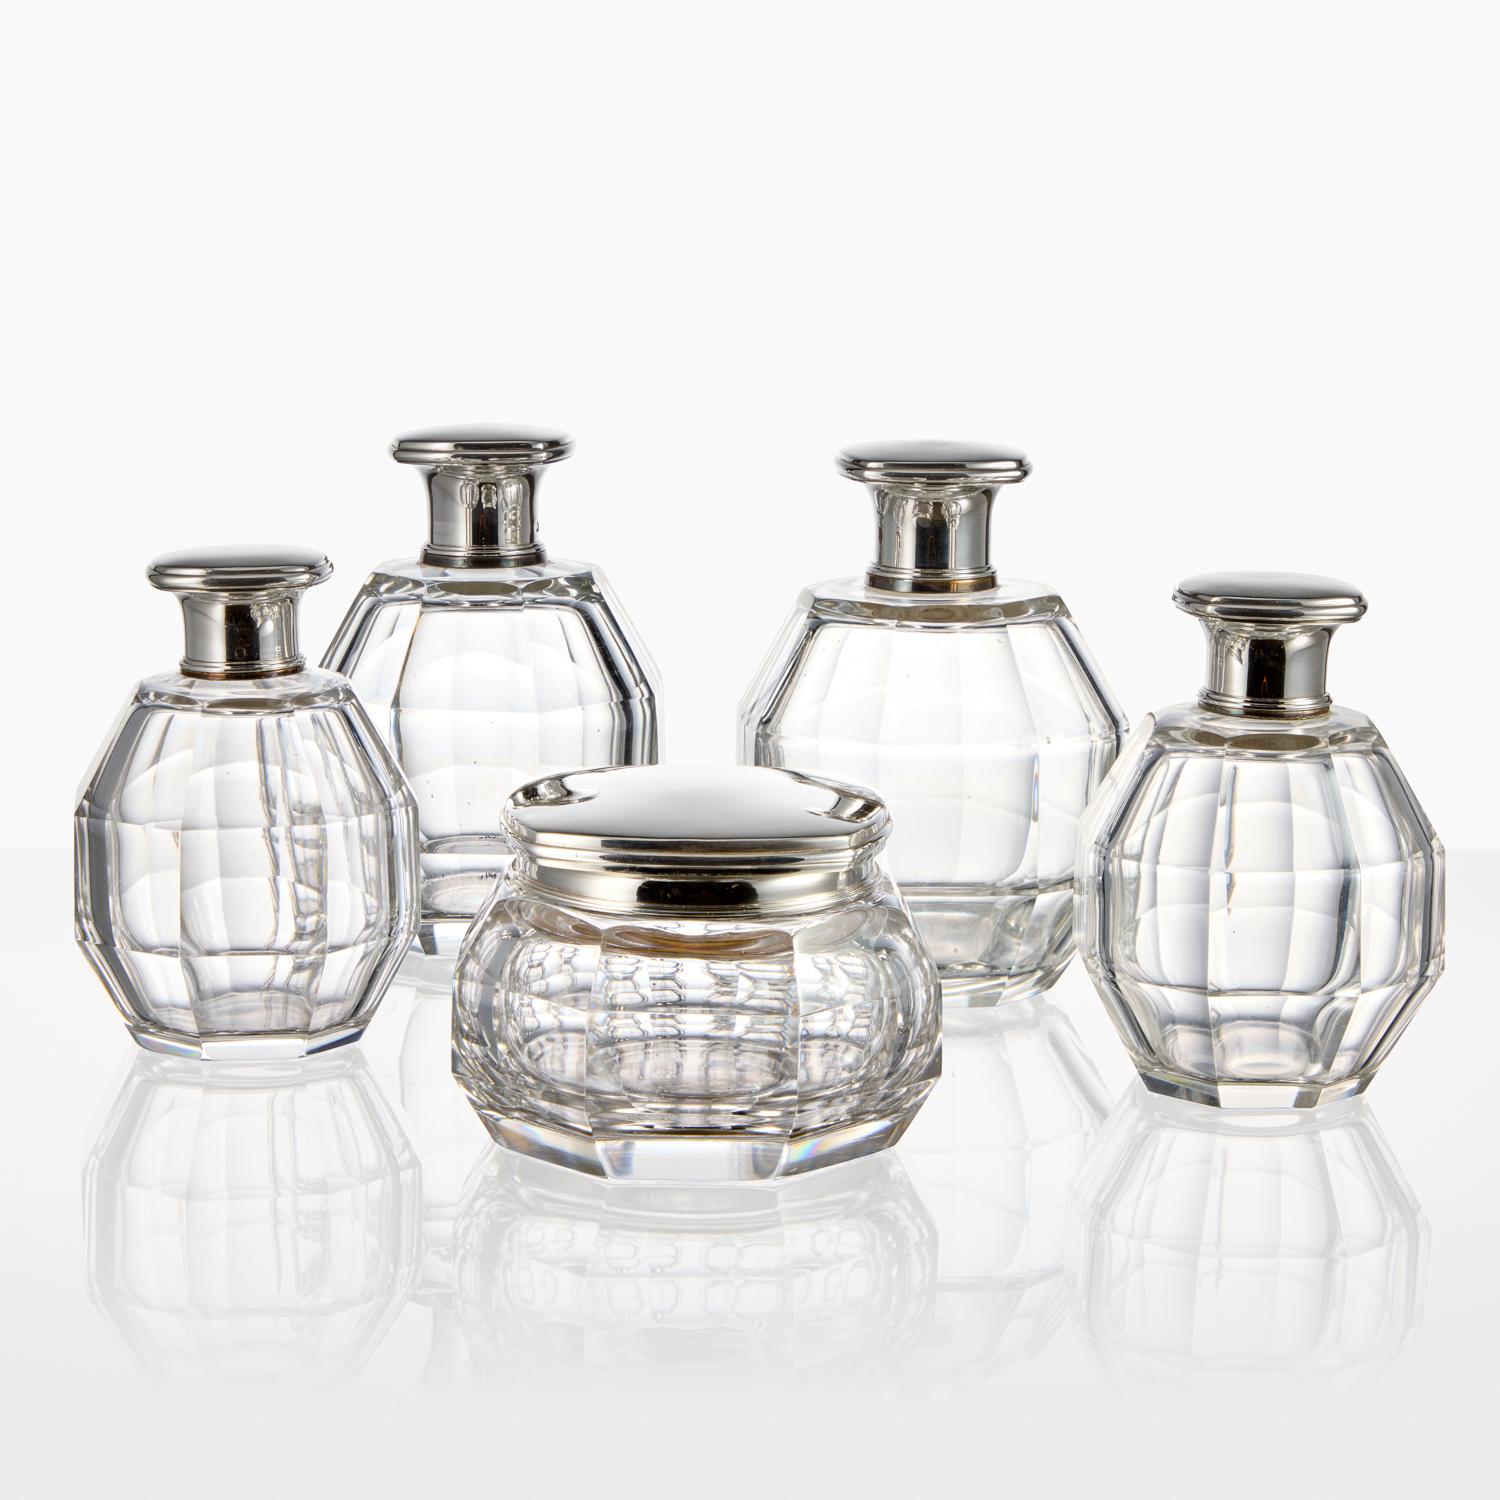 20th Century Set of Silver Art Deco Perfume Bottles France Circa 1920 In Excellent Condition For Sale In London, GB